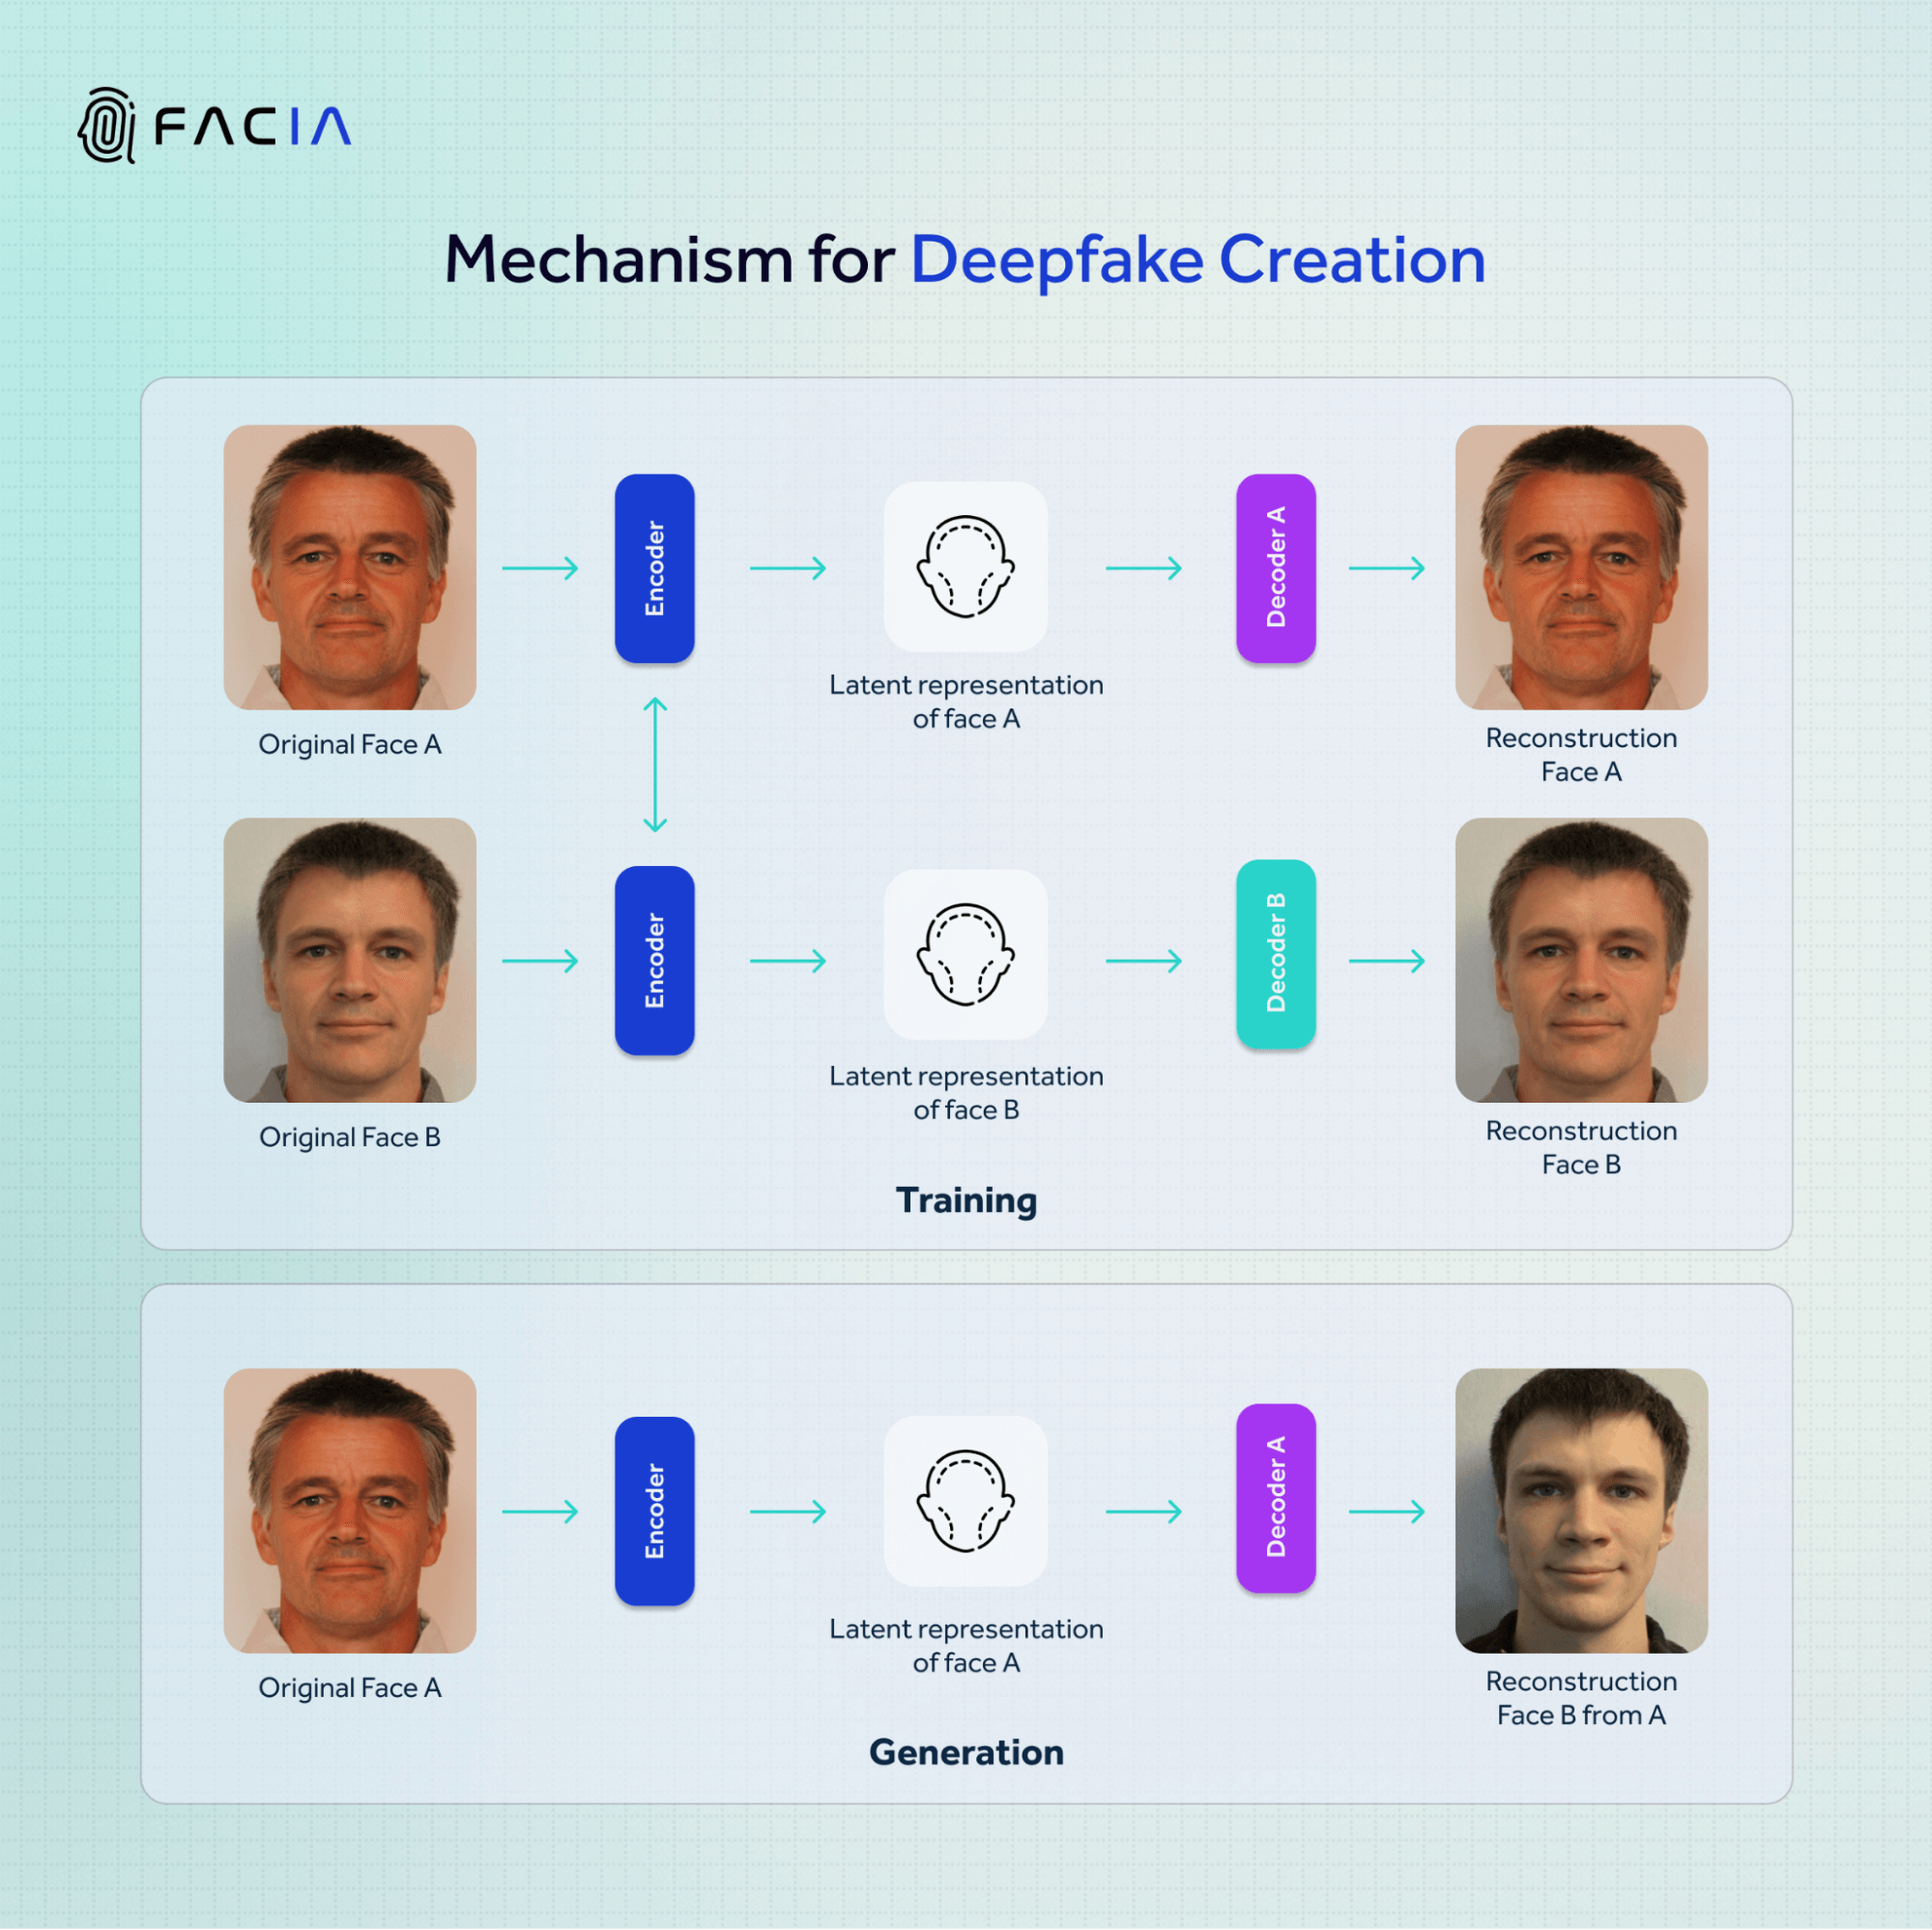 This infographic shows the creation of deepfake videos through the deployment of encoders and decoders to achieve targeted results.